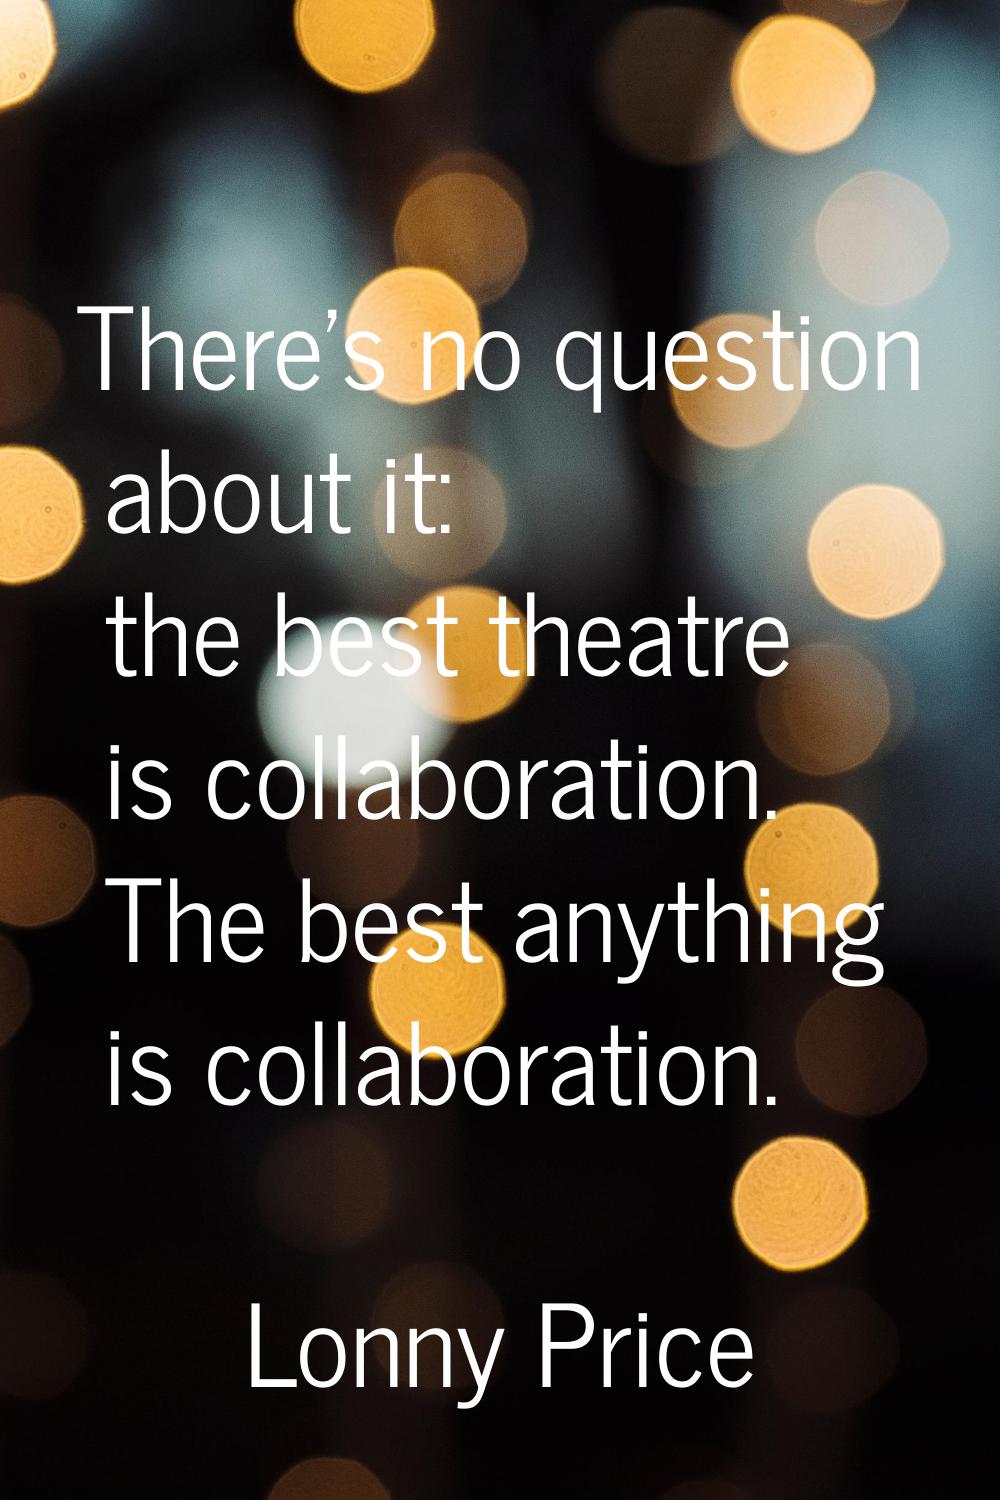 There's no question about it: the best theatre is collaboration. The best anything is collaboration